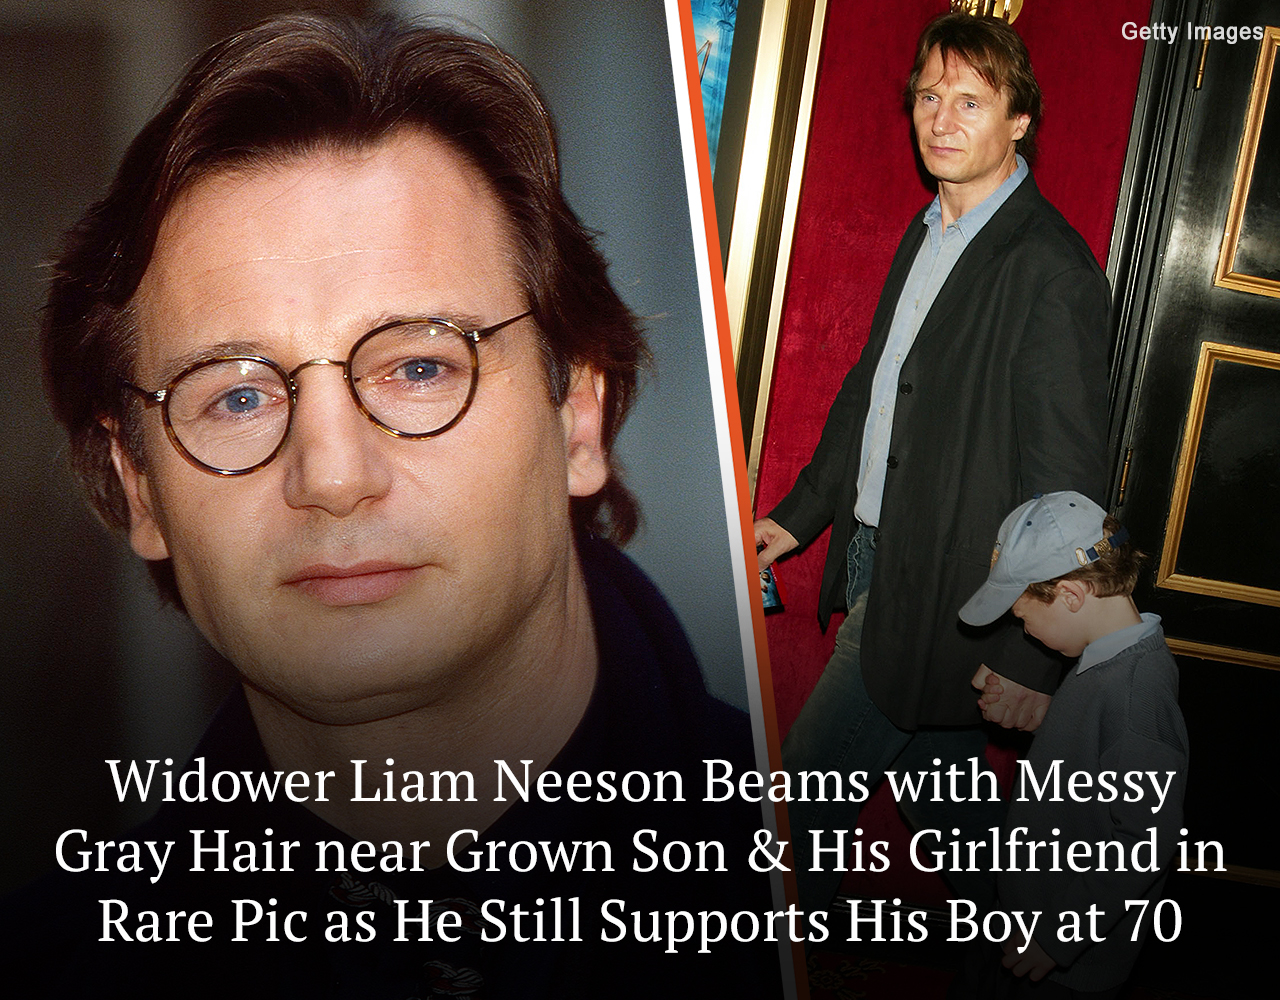 The rarely-seen 70-year-old Liam Neeson was spotted with his son and ...